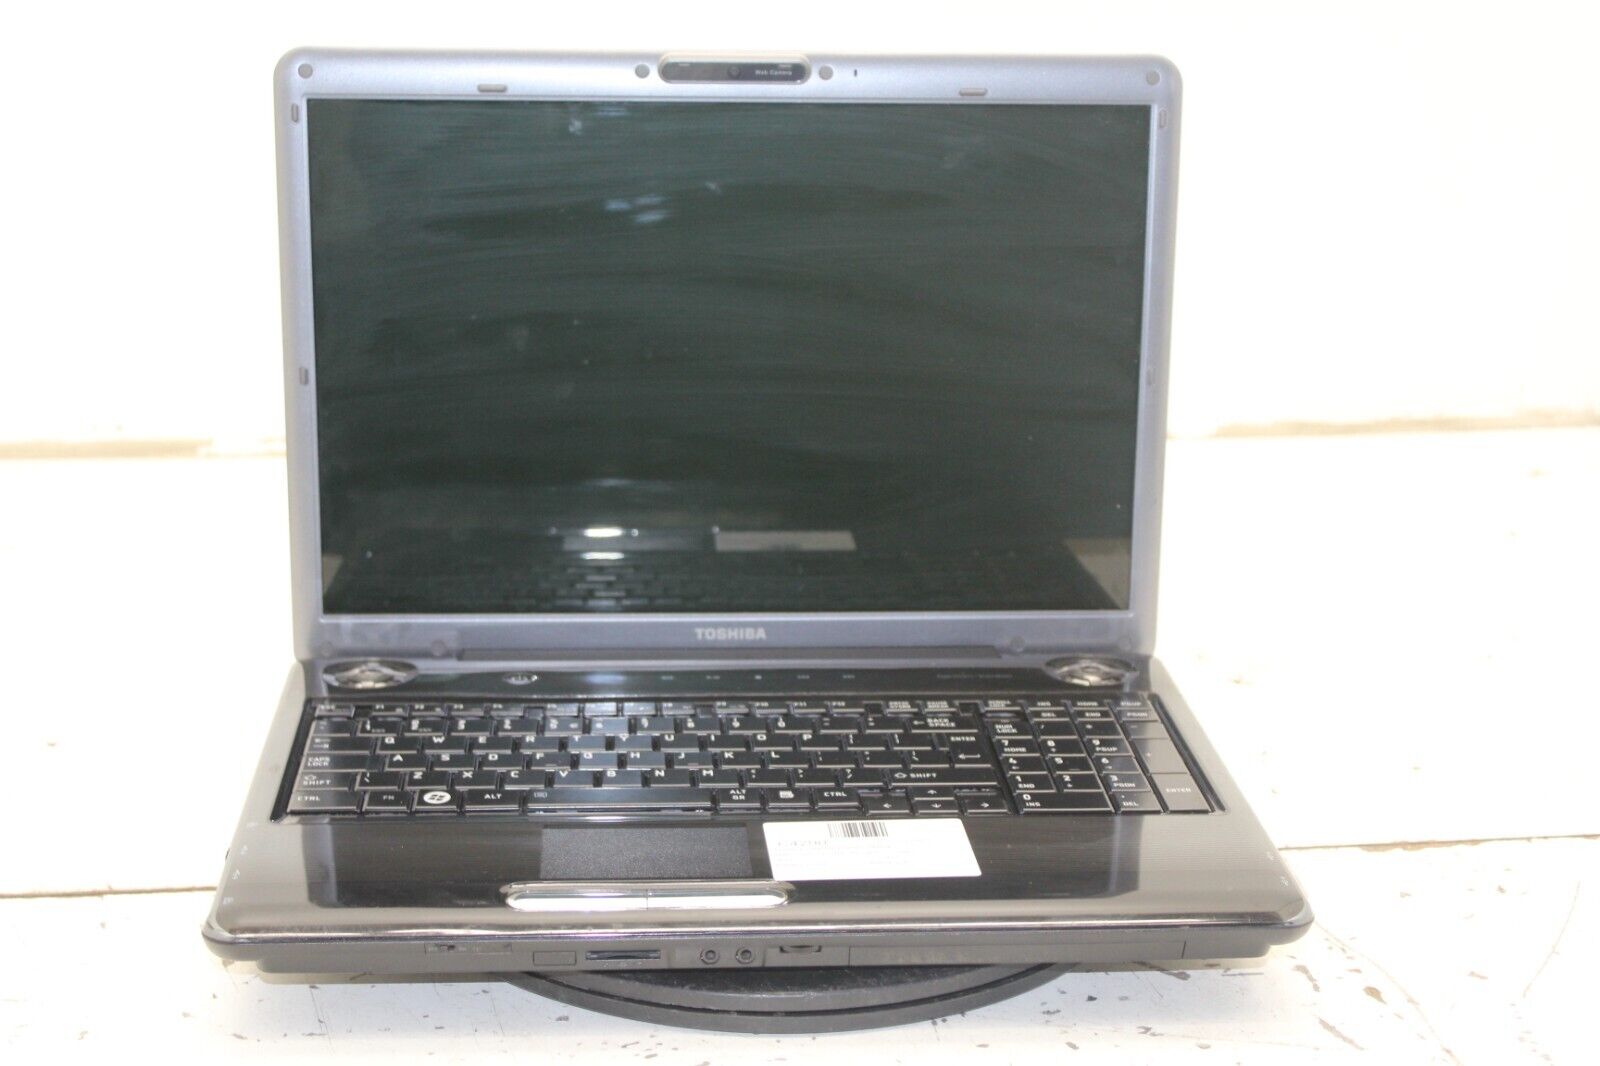 Toshiba Satellite P305D-S8828 Laptop AMD Turion x2 3GB Ram No HDD or Battery